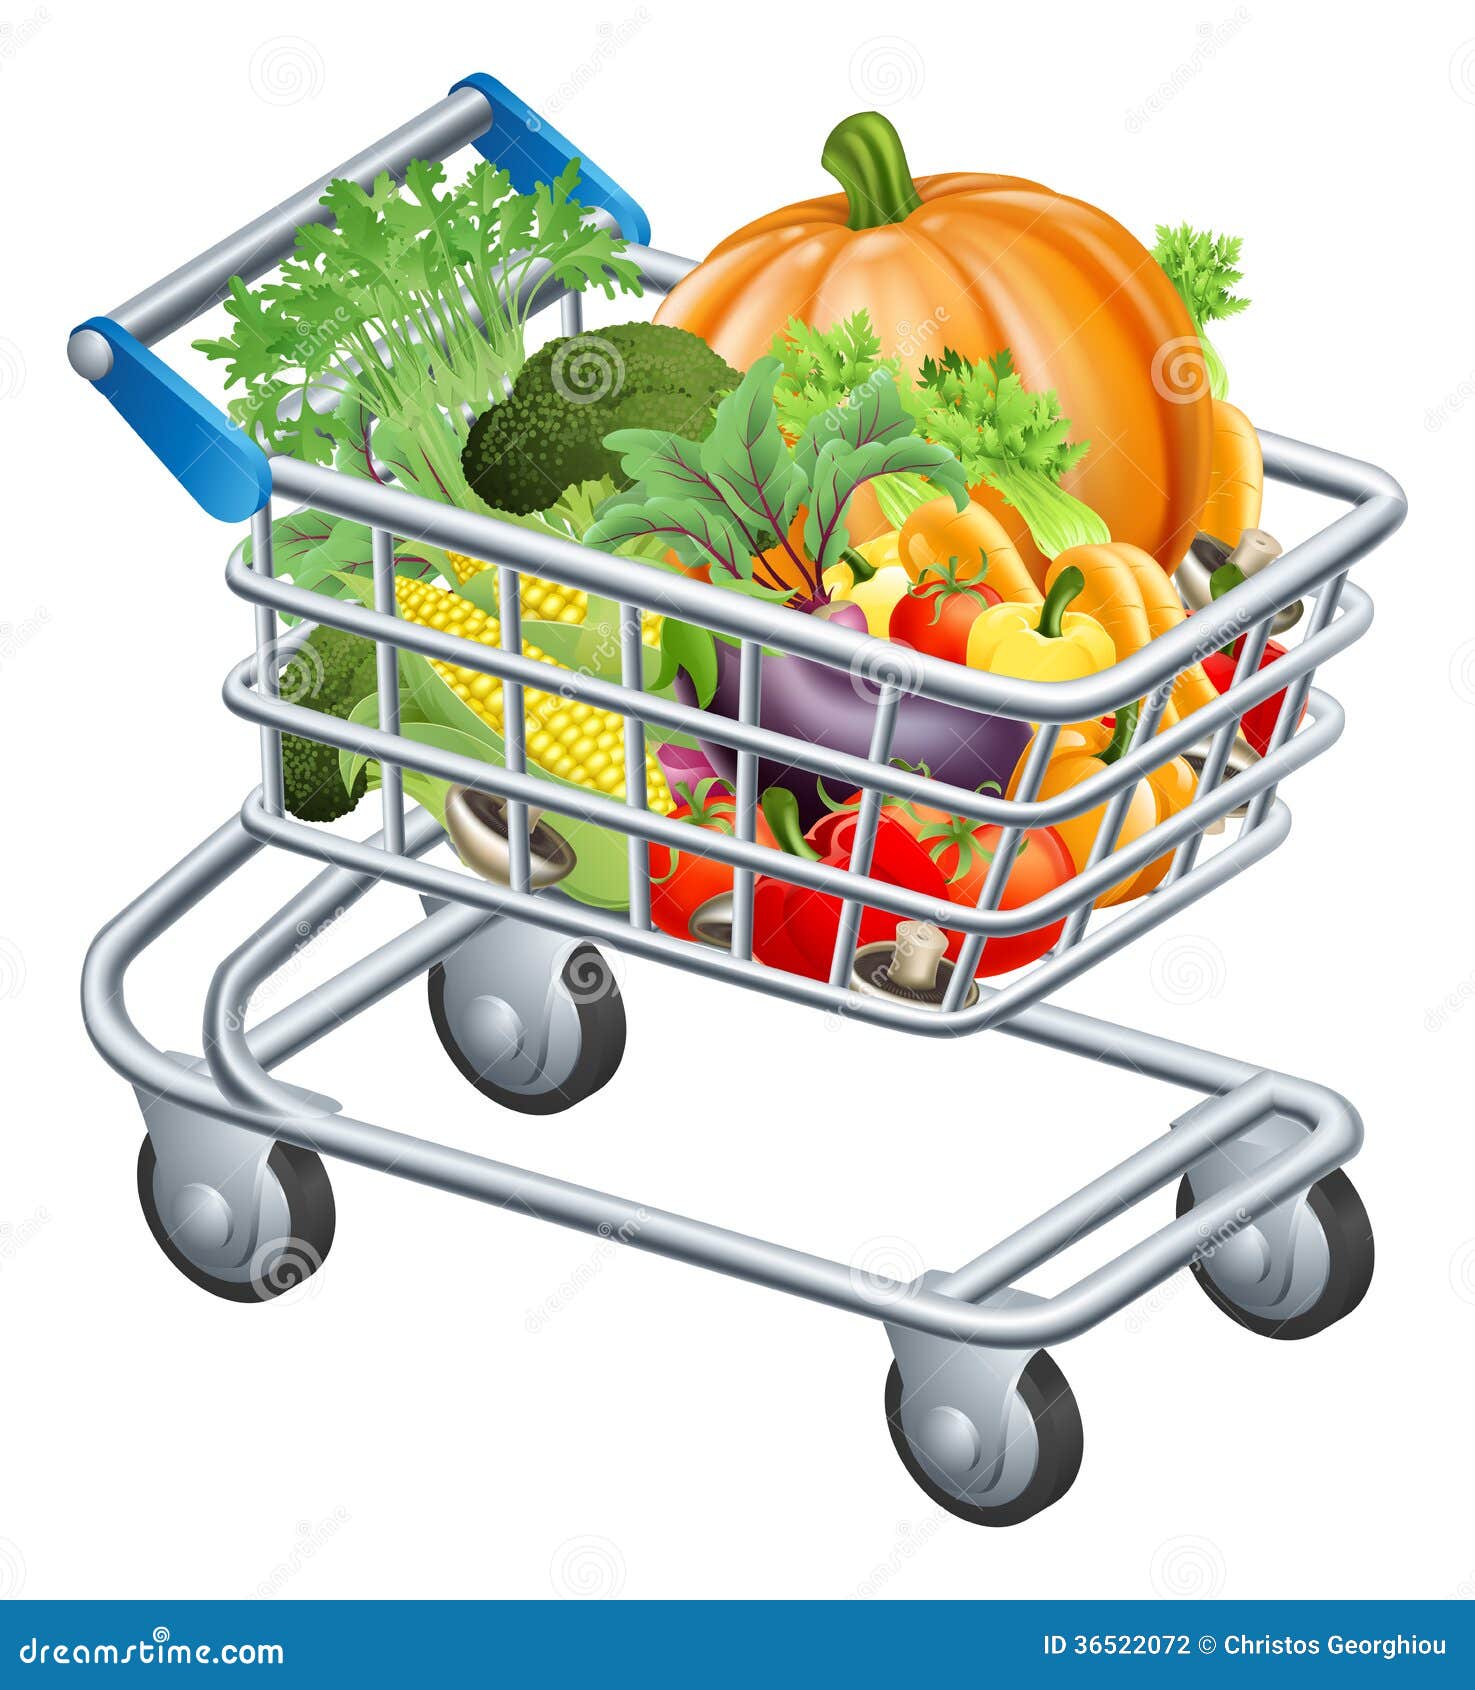 clipart shopping trolley - photo #40